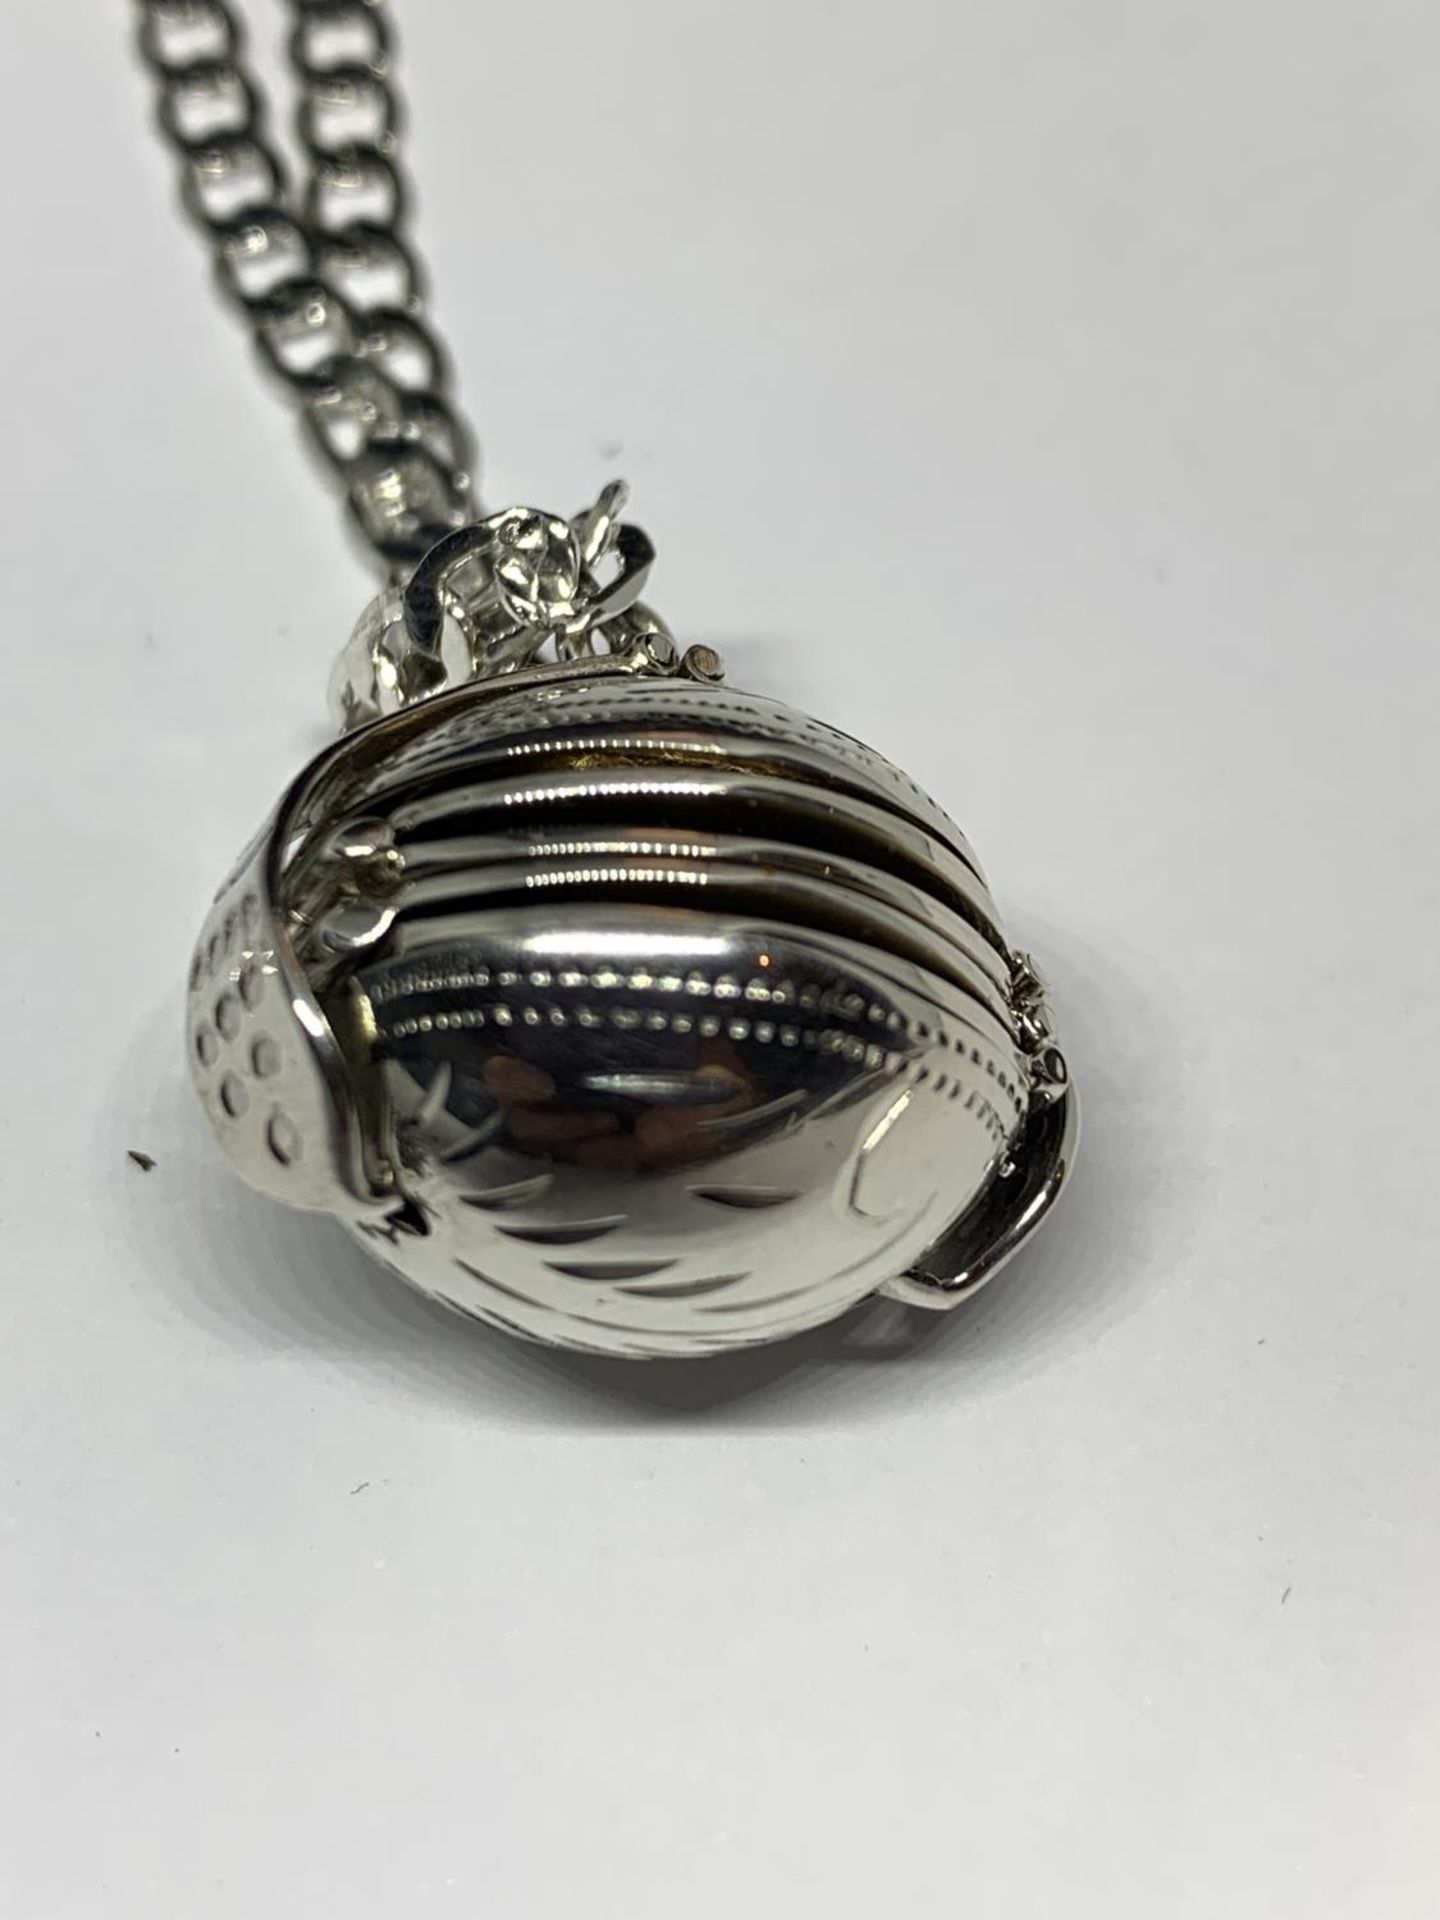 A MARKD SILVER NECKLACE WITH AN ORNATE BALL LOCKET PENDANT - Image 3 of 8